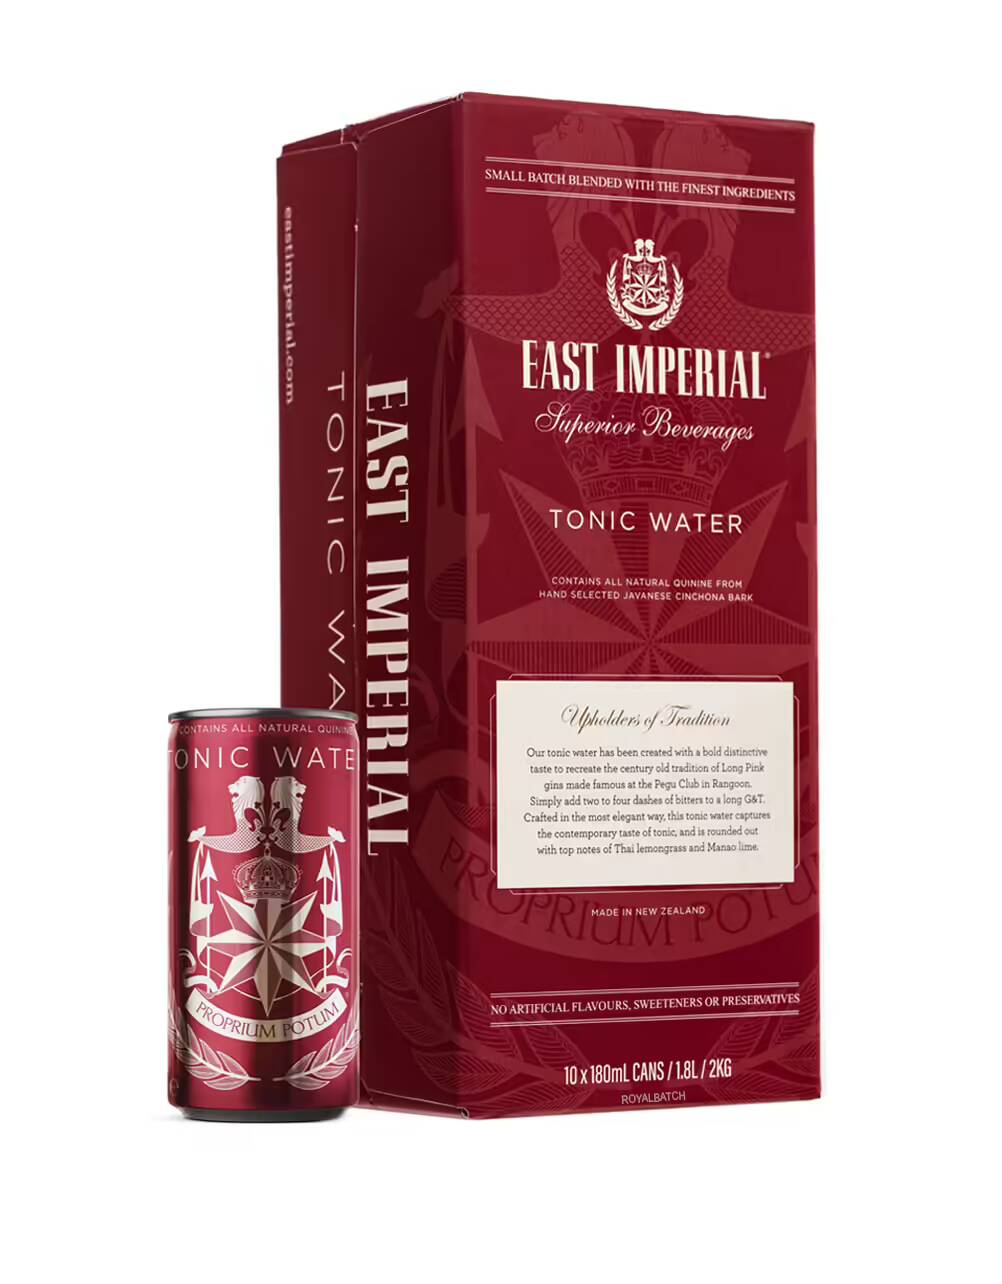 East Imperial Superior Beverages Tonic Water (10 PACK) 6.1 FL OZ CANS